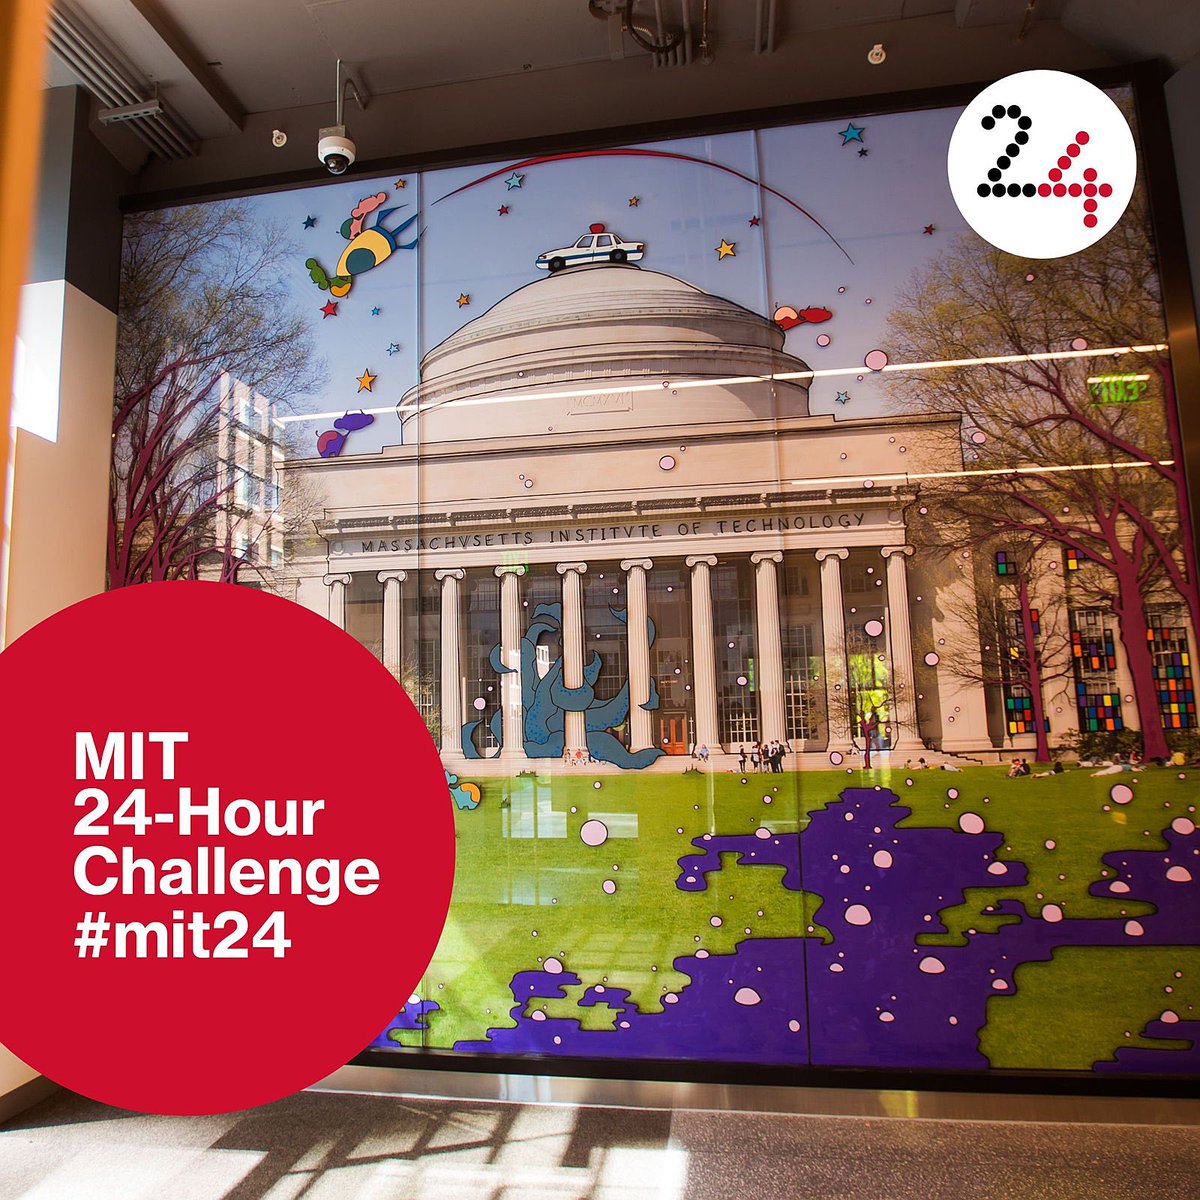 Support @MIT 24-Hour challenge to support students #research!!!

@MITpkg ➡️ 1st $10K 🔓➡️ need 30+ donors to🔓2nd $10K
@kochinstitute ➡️ 20+ donors to🔓$5K
@MITEngineering ➡️ 40+ donors to🔓$25K
@ScienceMIT ➡️ 35+ donors to🔓$50K

mtyc.co/q4u8cf

@MIT_alumni #MIT24